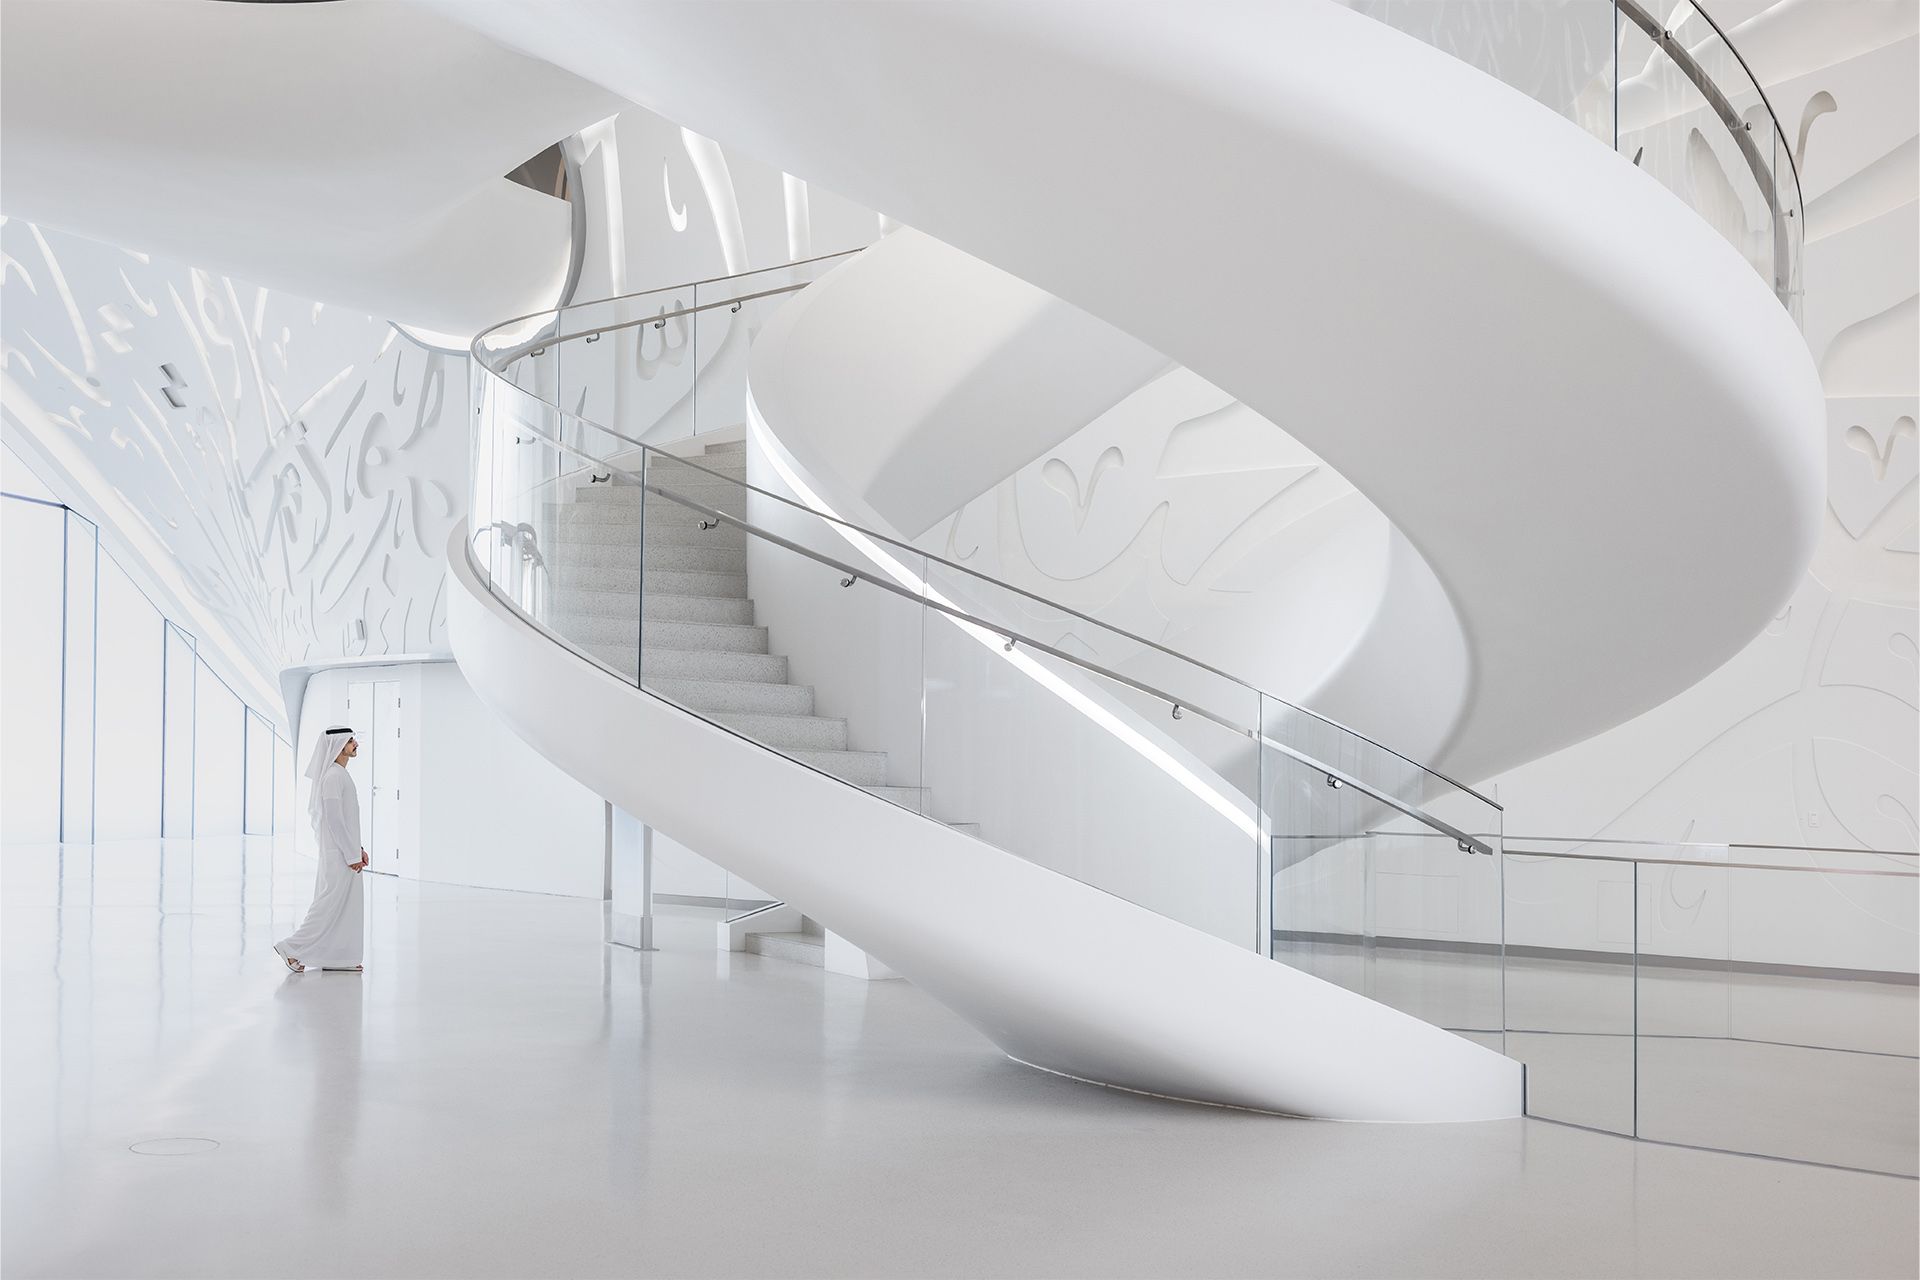 A view of the white, spiral staircase in the museum lobby.